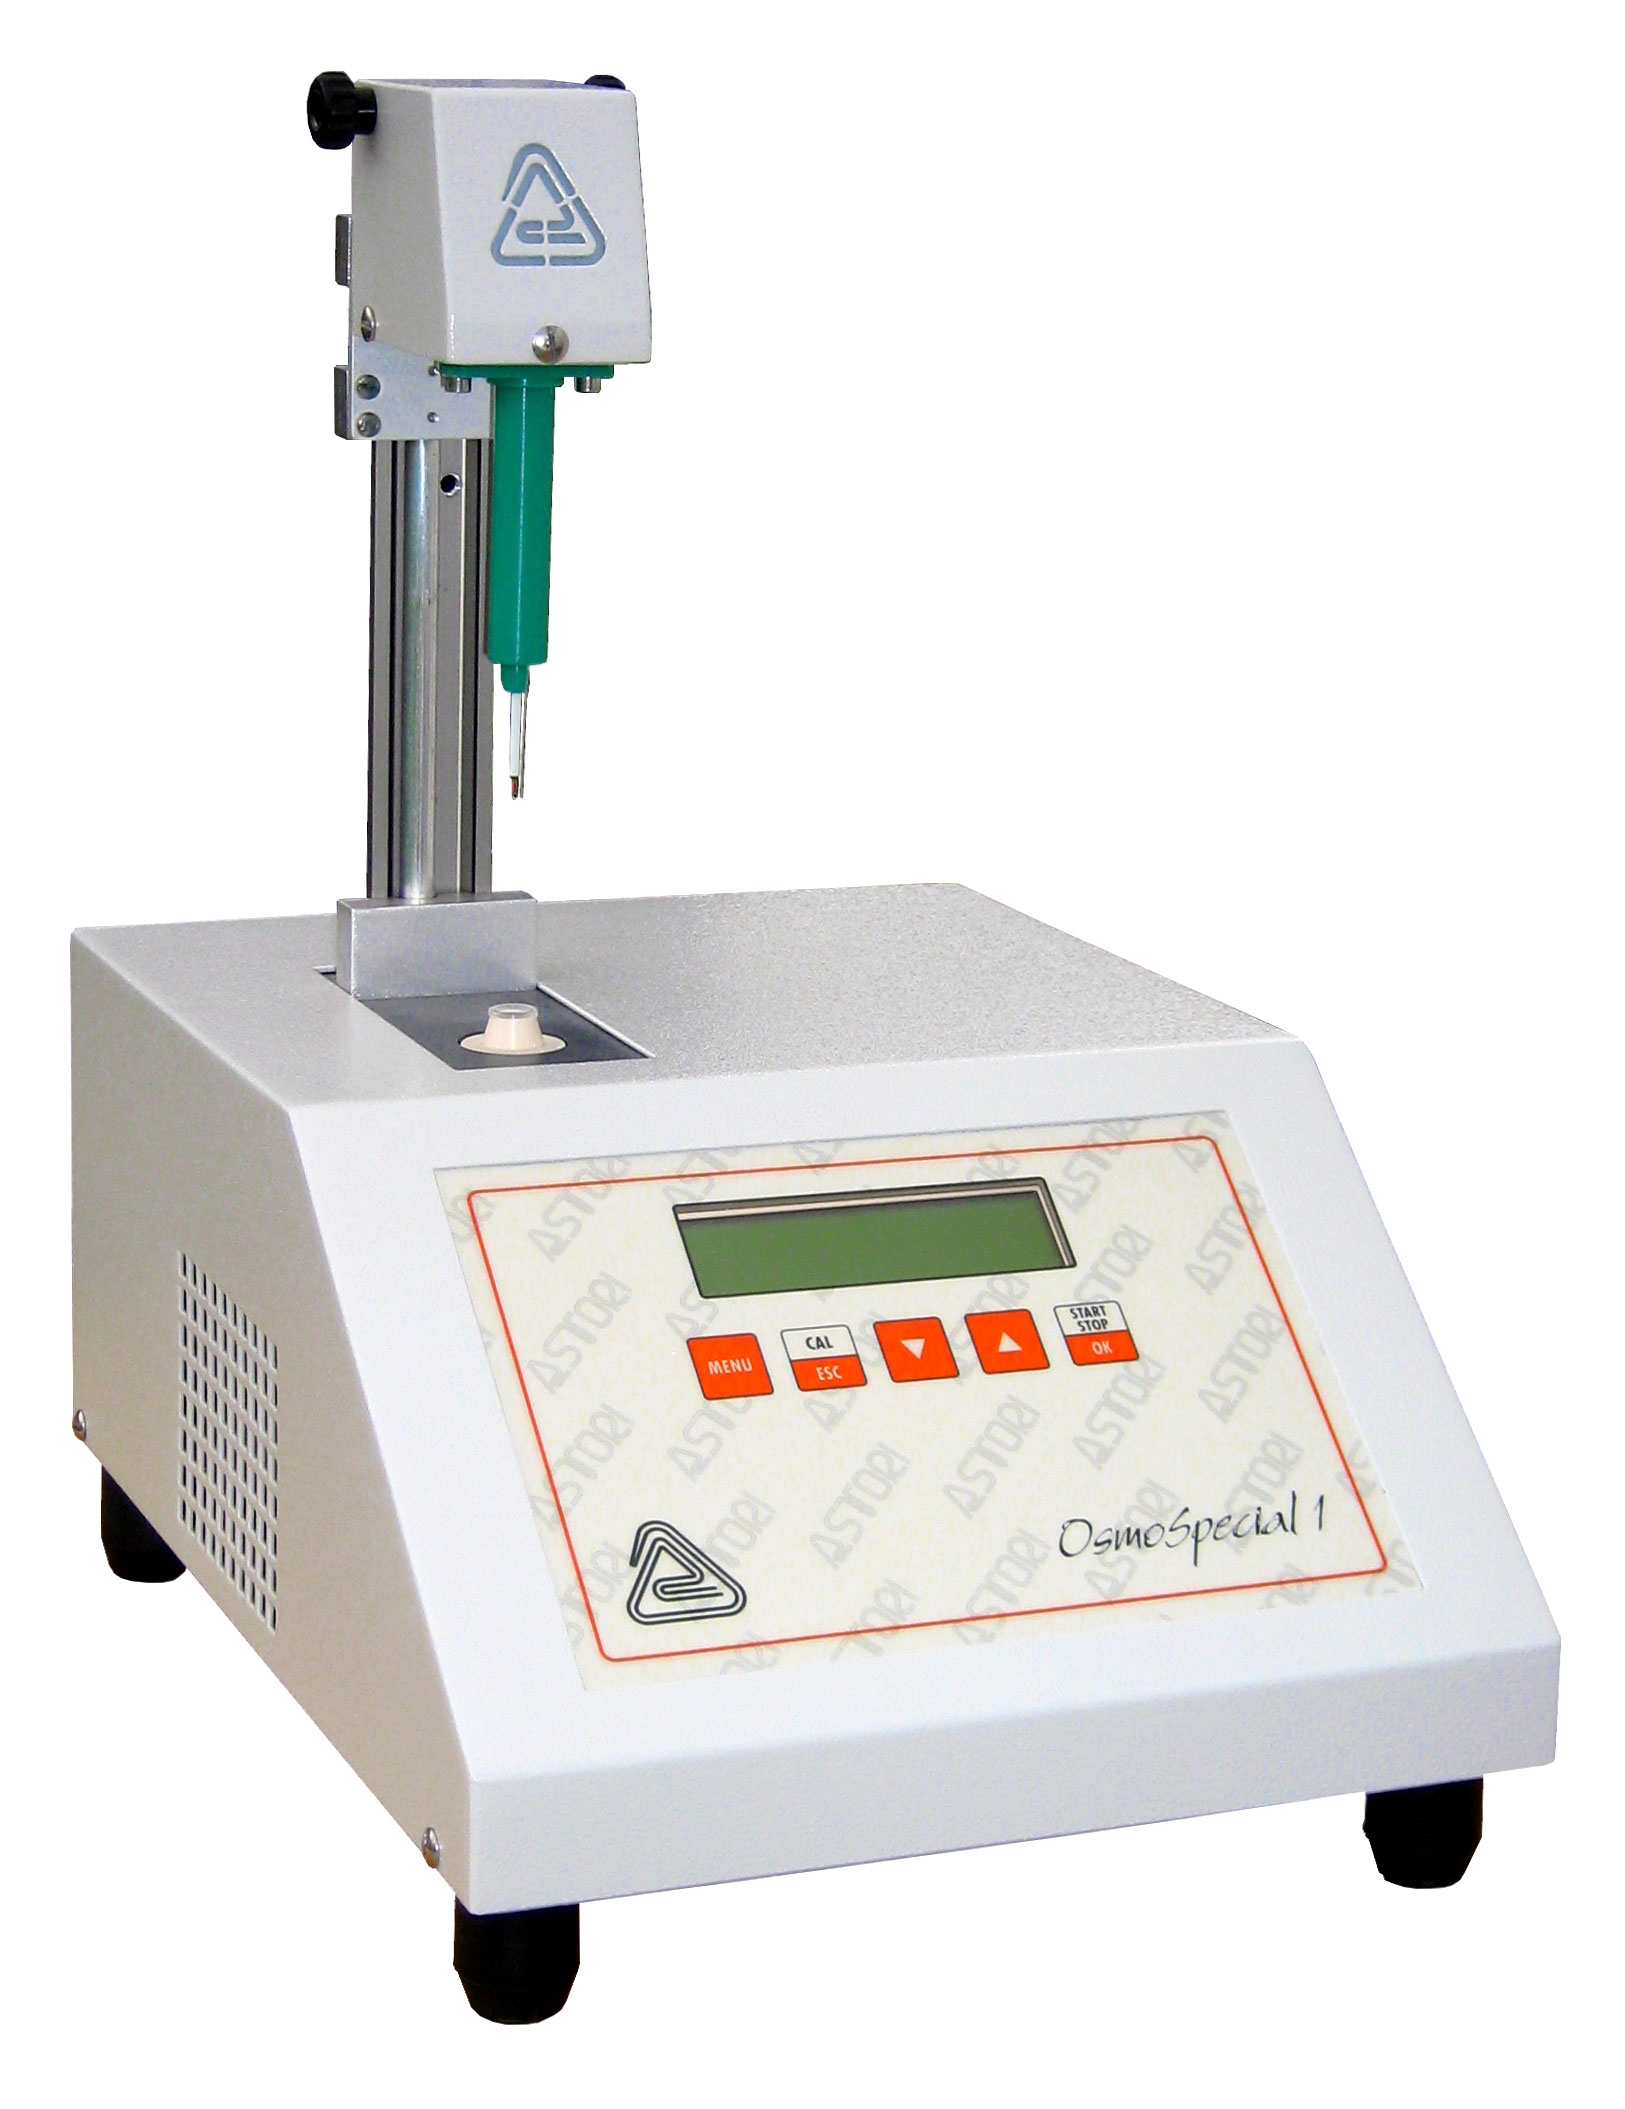 OsmoSpecial 1 semiautomatic osmometer